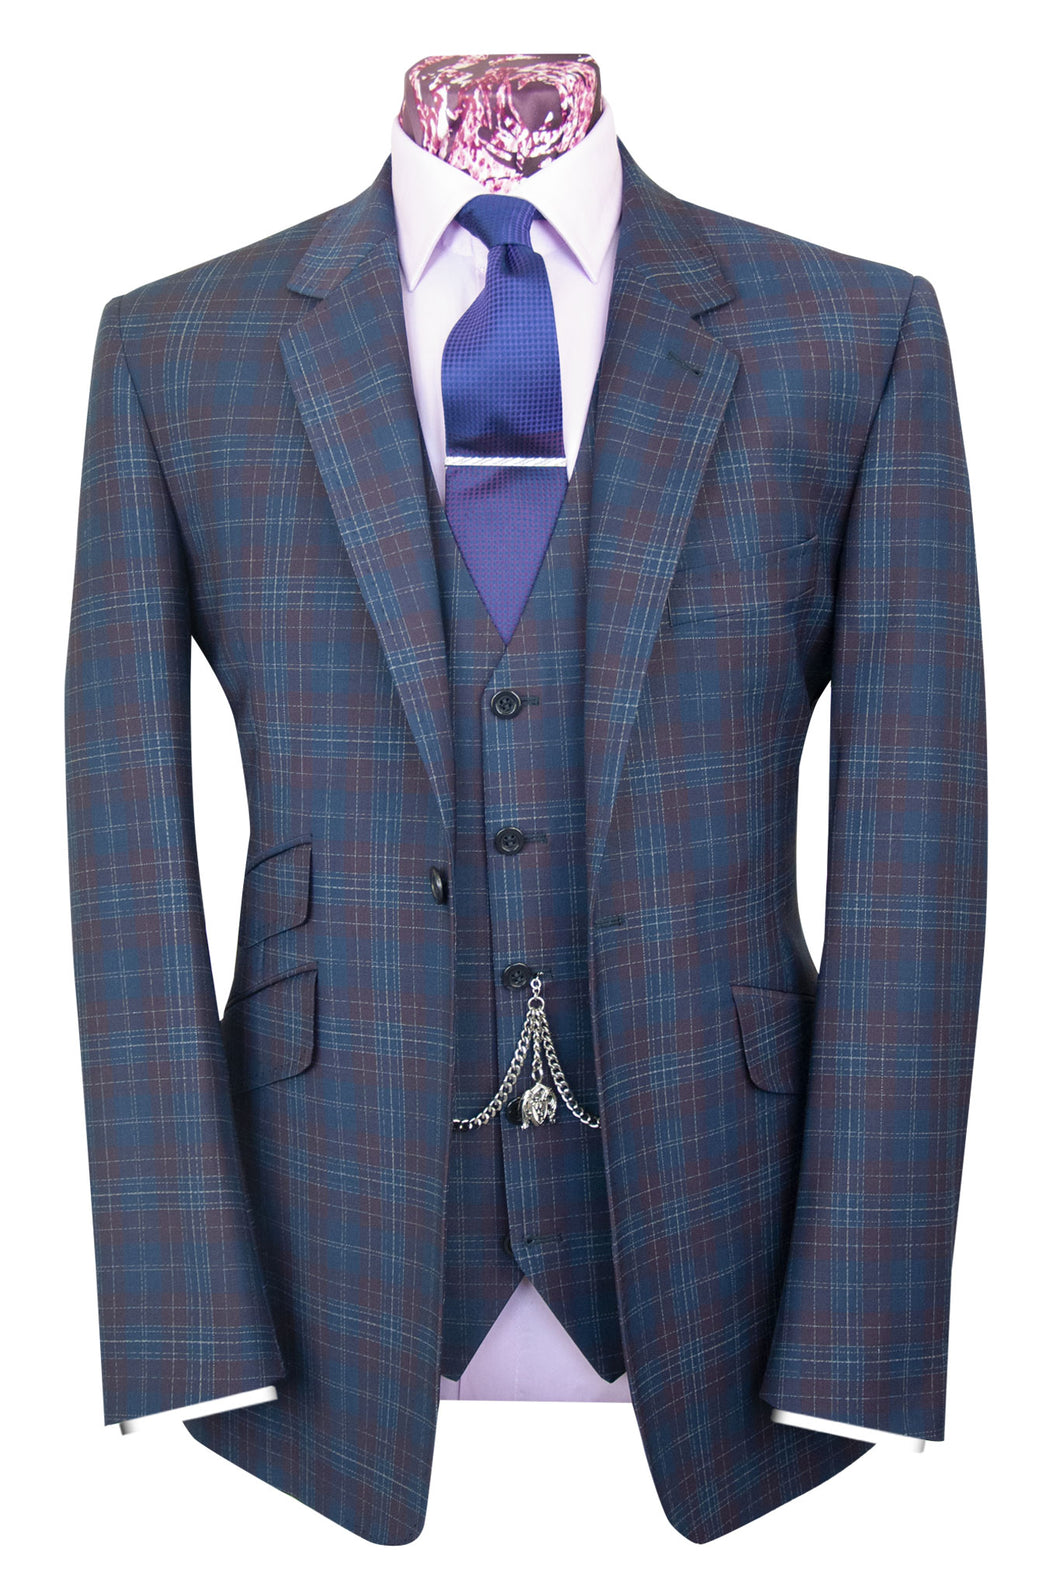 The Carroll Oxford Blue with Plum and White Grid Check Suit